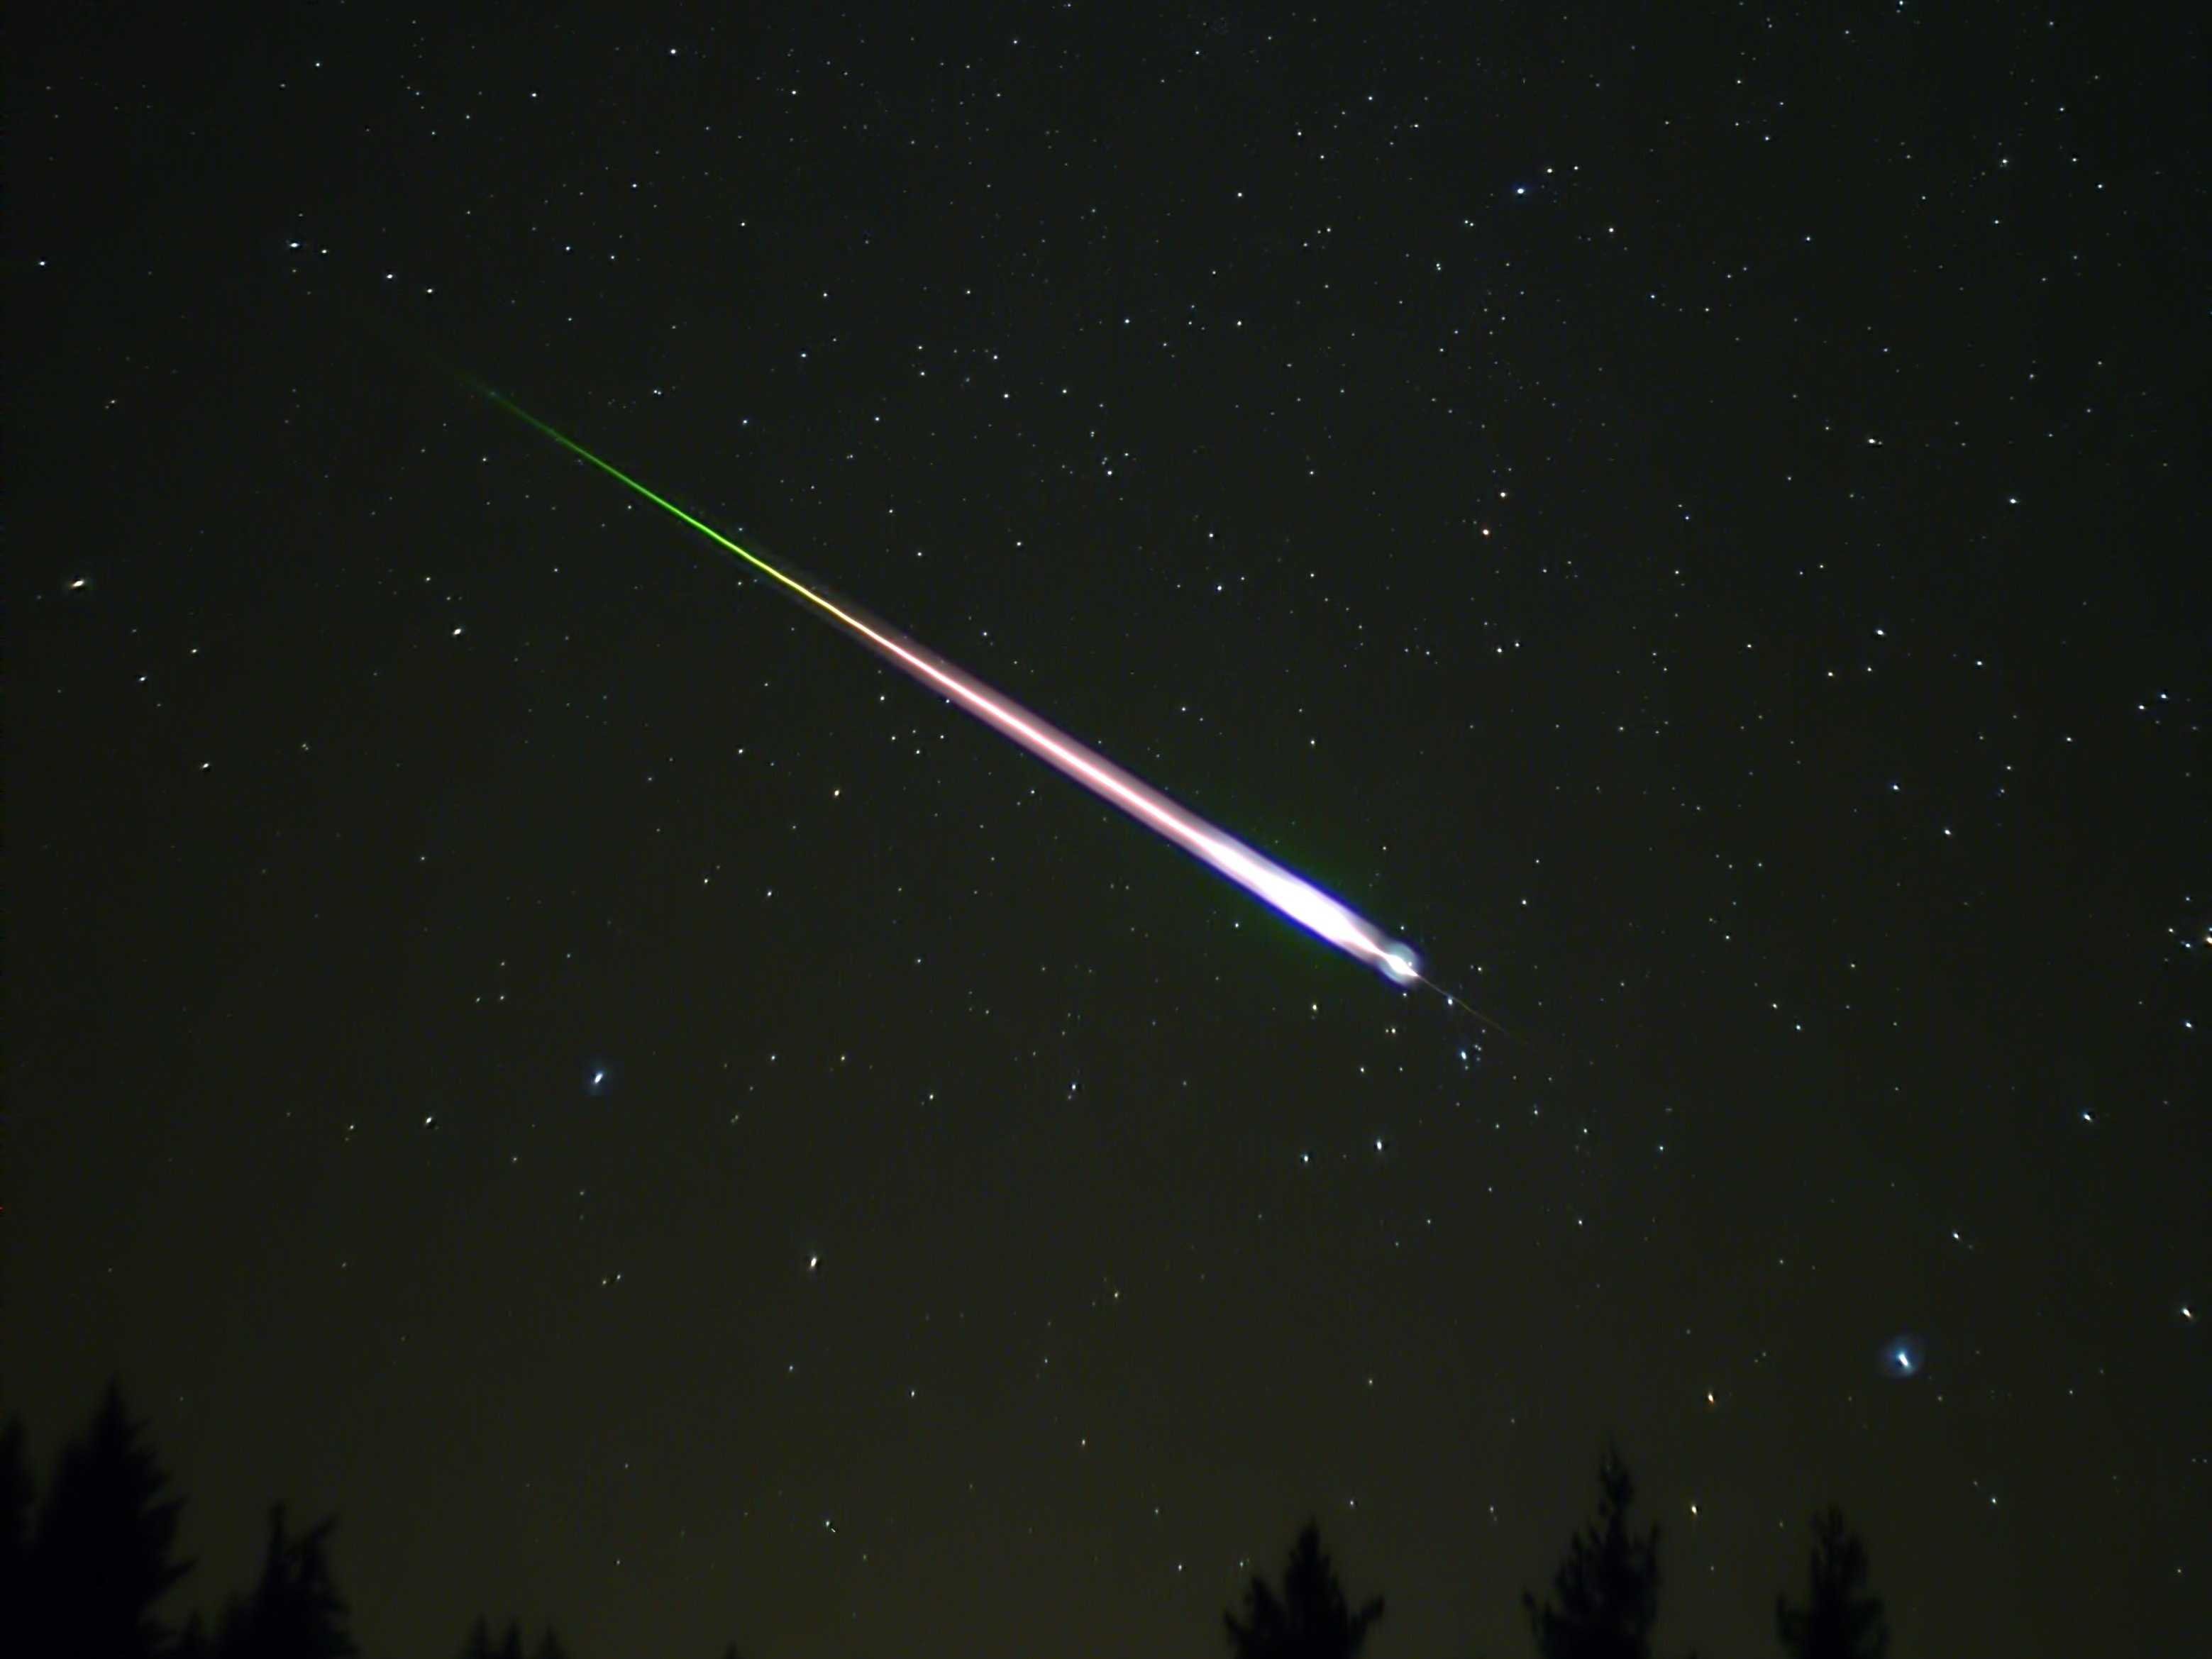 Real Meteor Shower Background HD Wallpaper Image